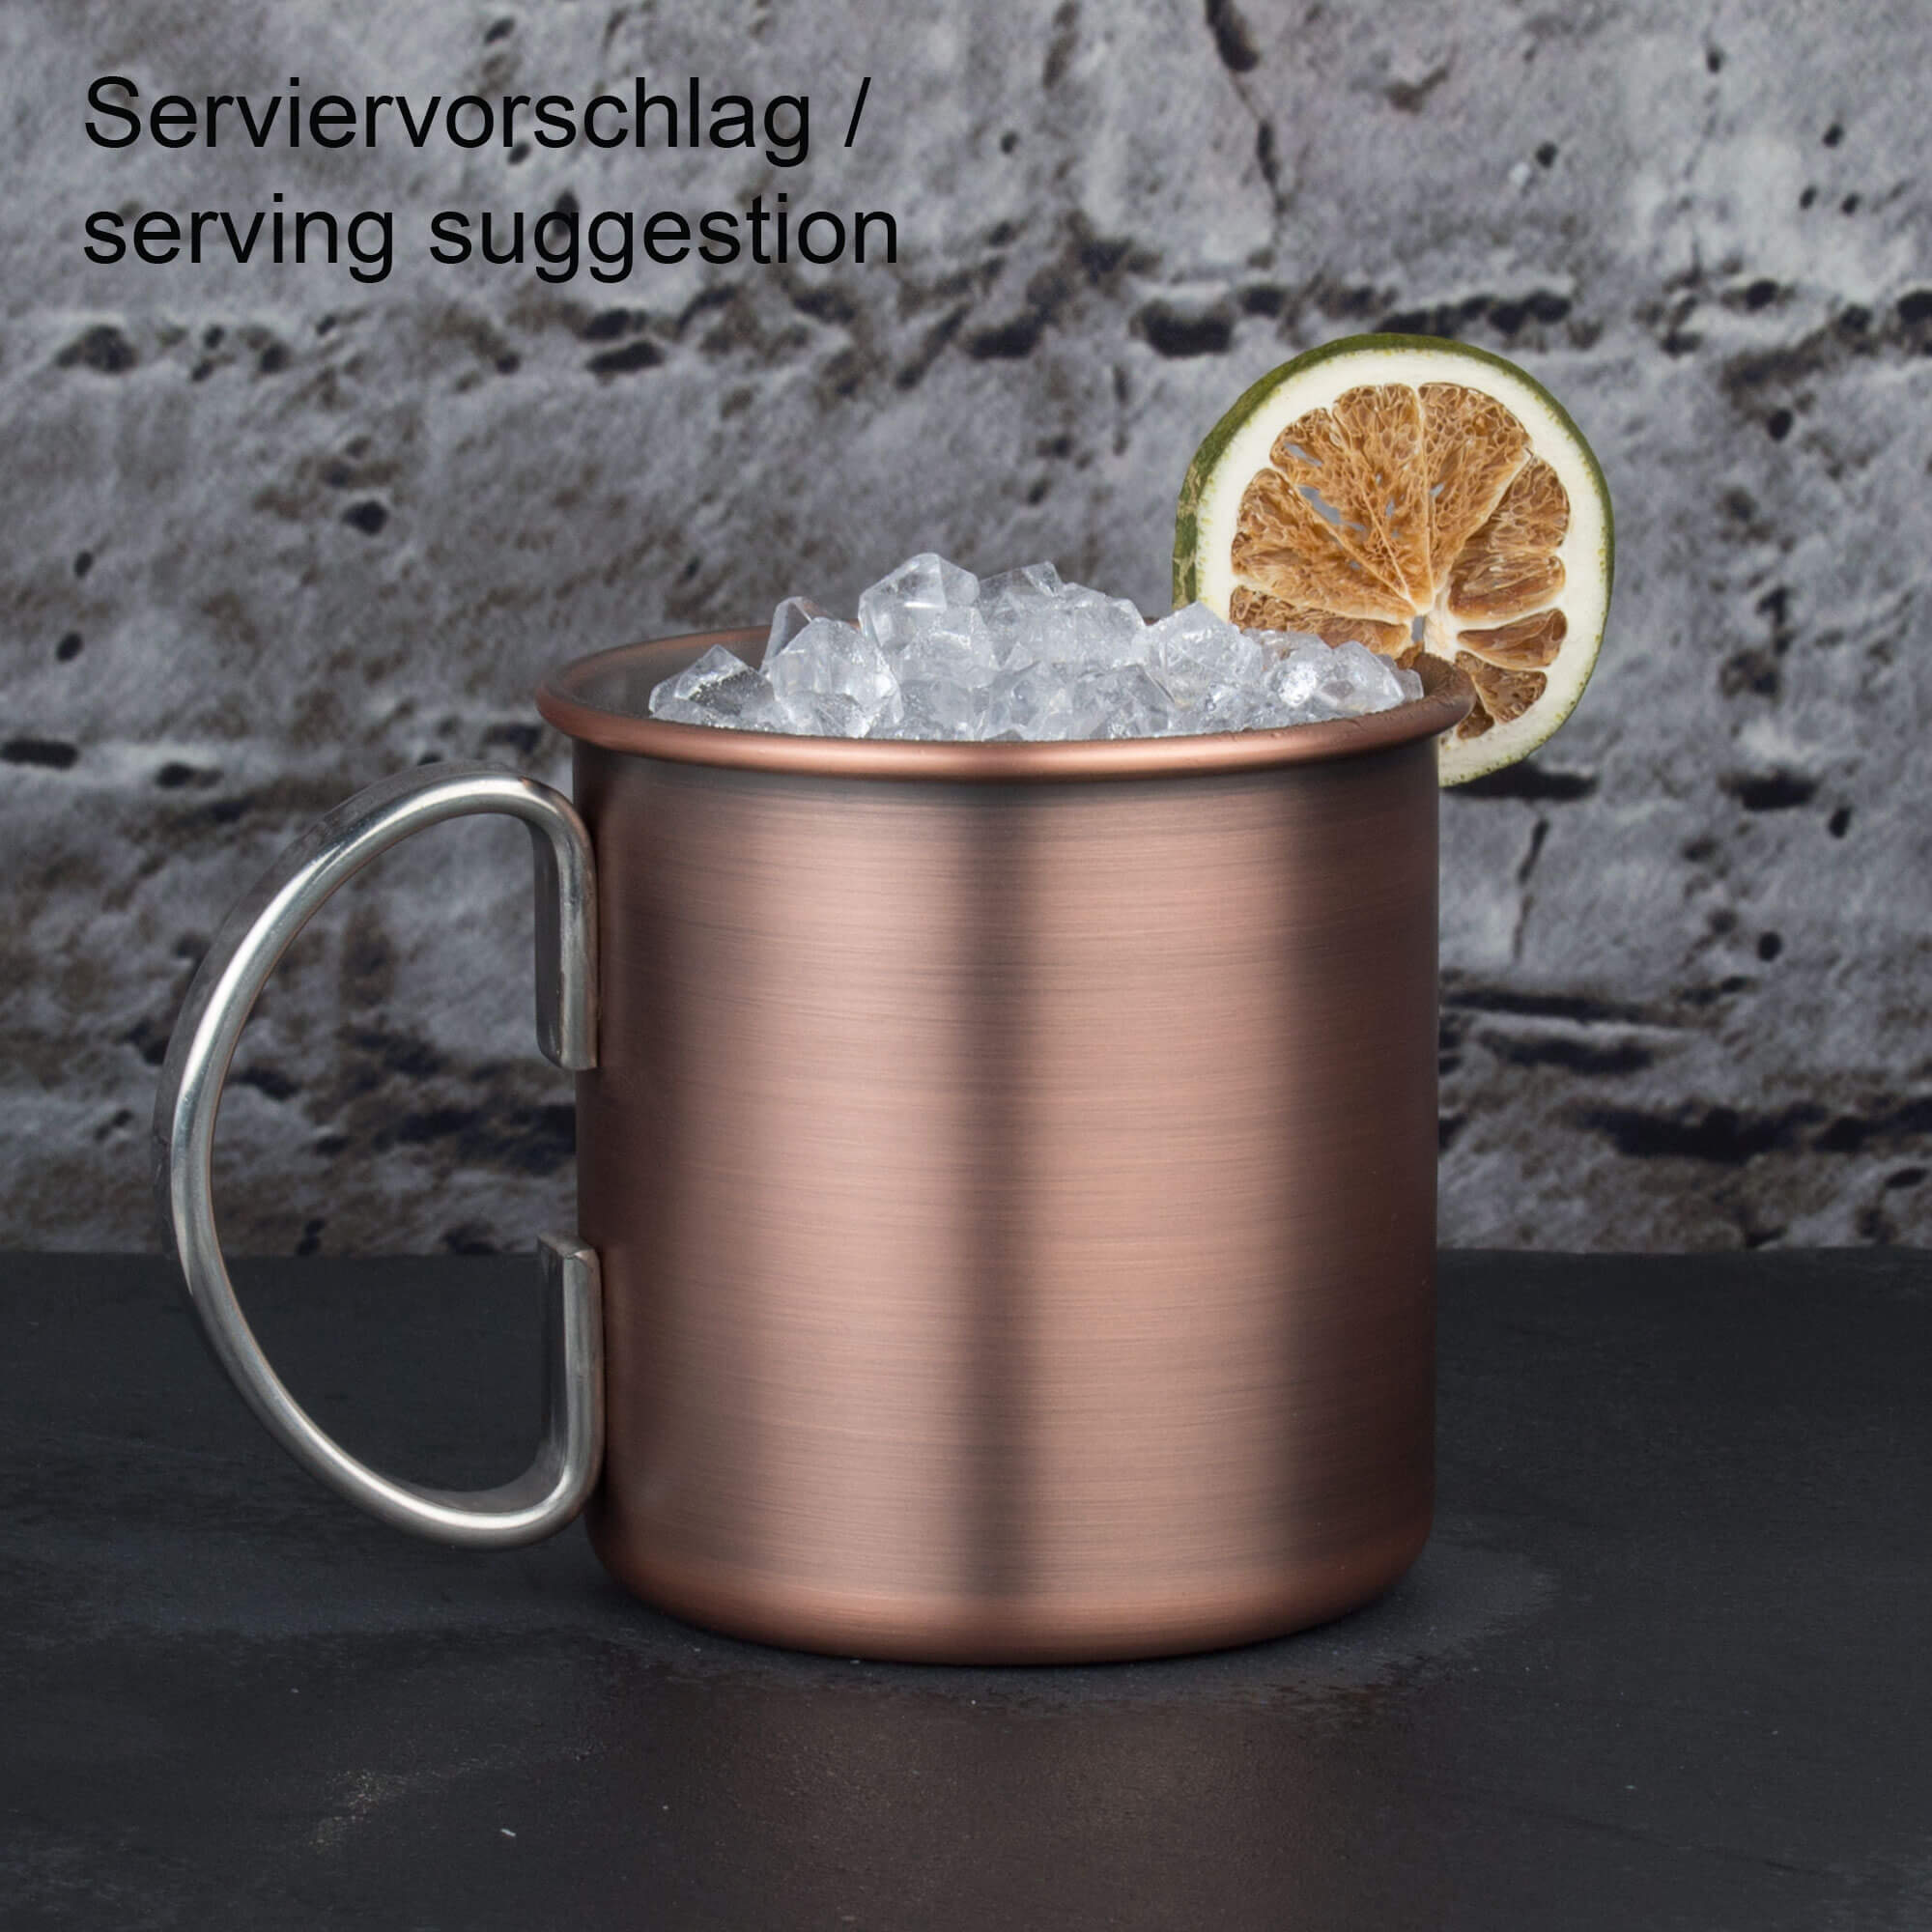 Moscow mule mug, antique copper look - 450ml